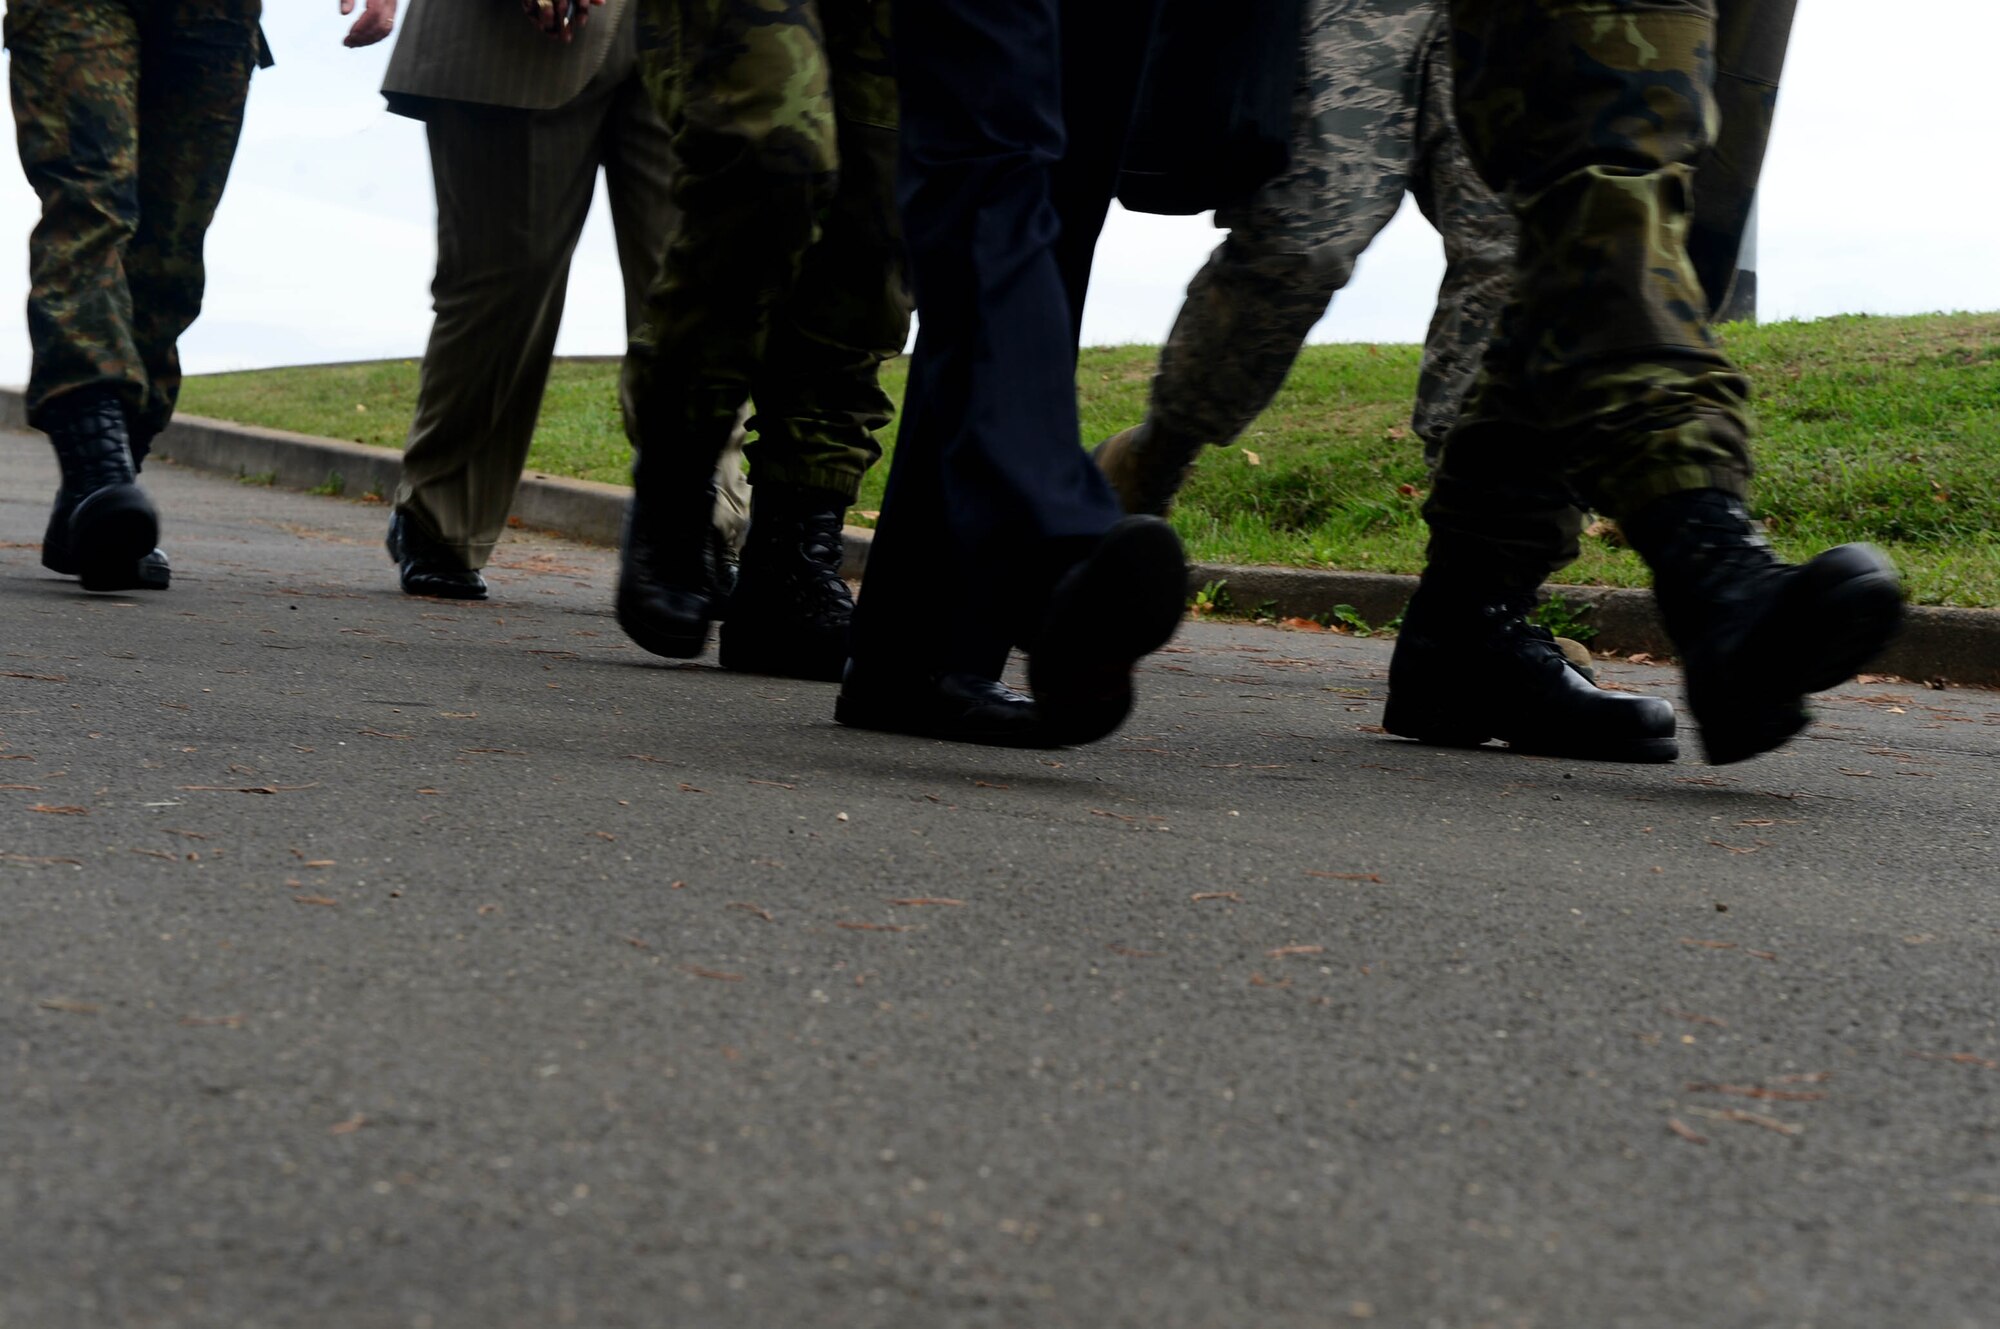 Inspectors from the Conventional Armed Forces in Europe treaty verification team walk to different buildings during an exercise at Spangdahlem Air Base, Germany, Sept. 29, 2014. The Czech Republic and France inspected the installation as part of a treaty verification exercise hosted by the 52nd Fighter Wing. (U.S. Air Force photo by Airman 1st Class Kyle Gese/Released)